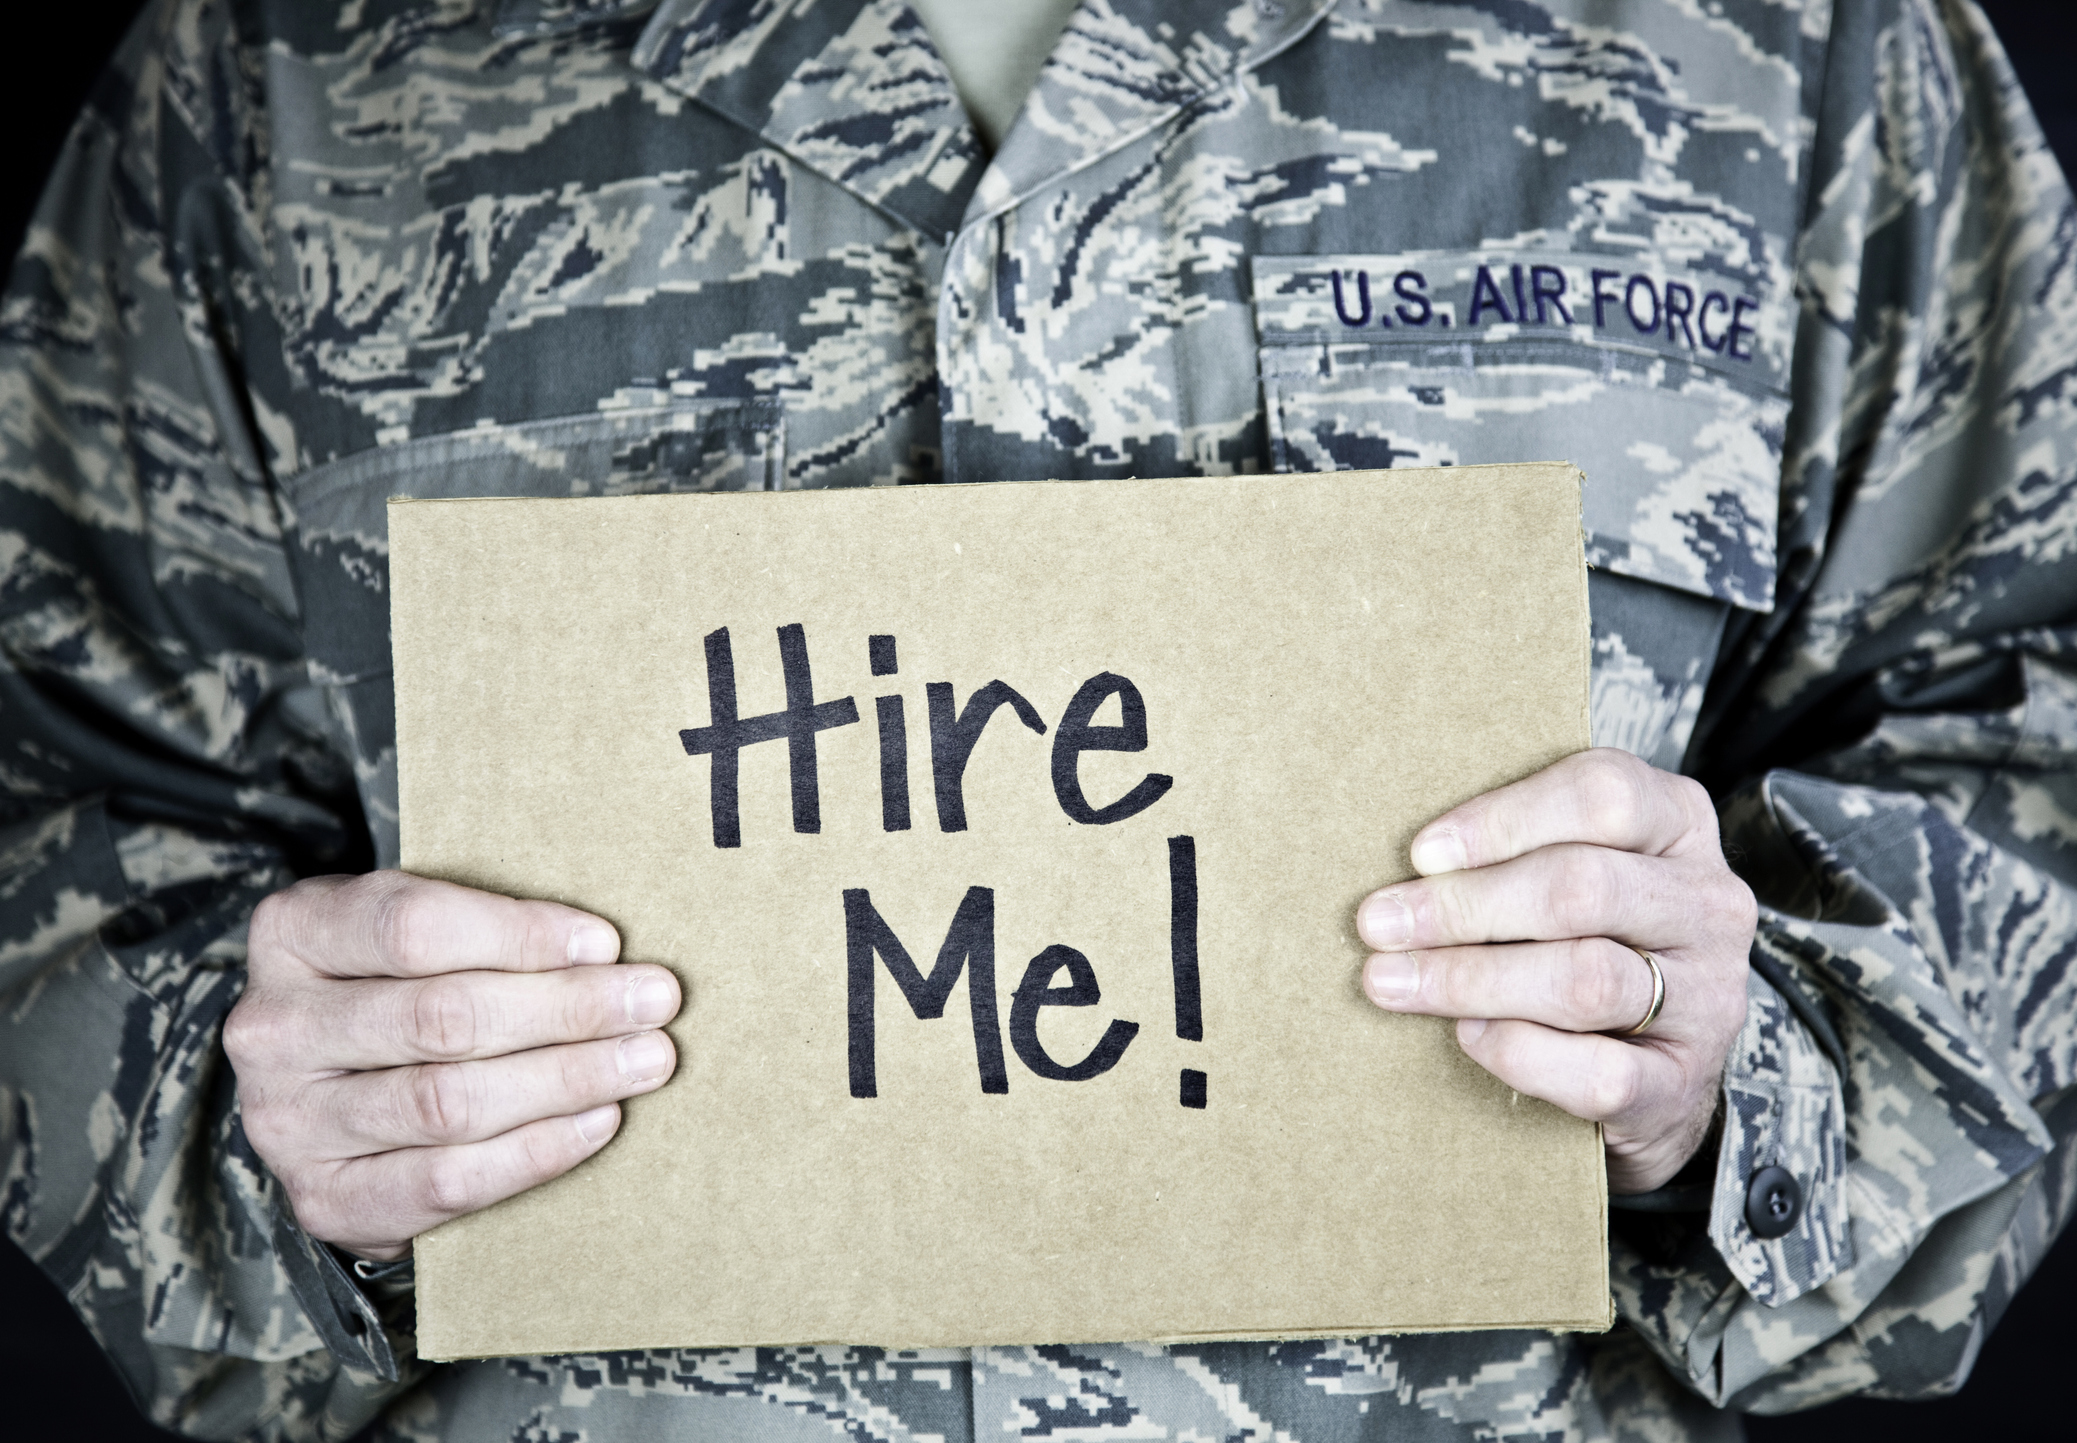 Effective Strategies to Source Veterans and Candidates with Disabilities